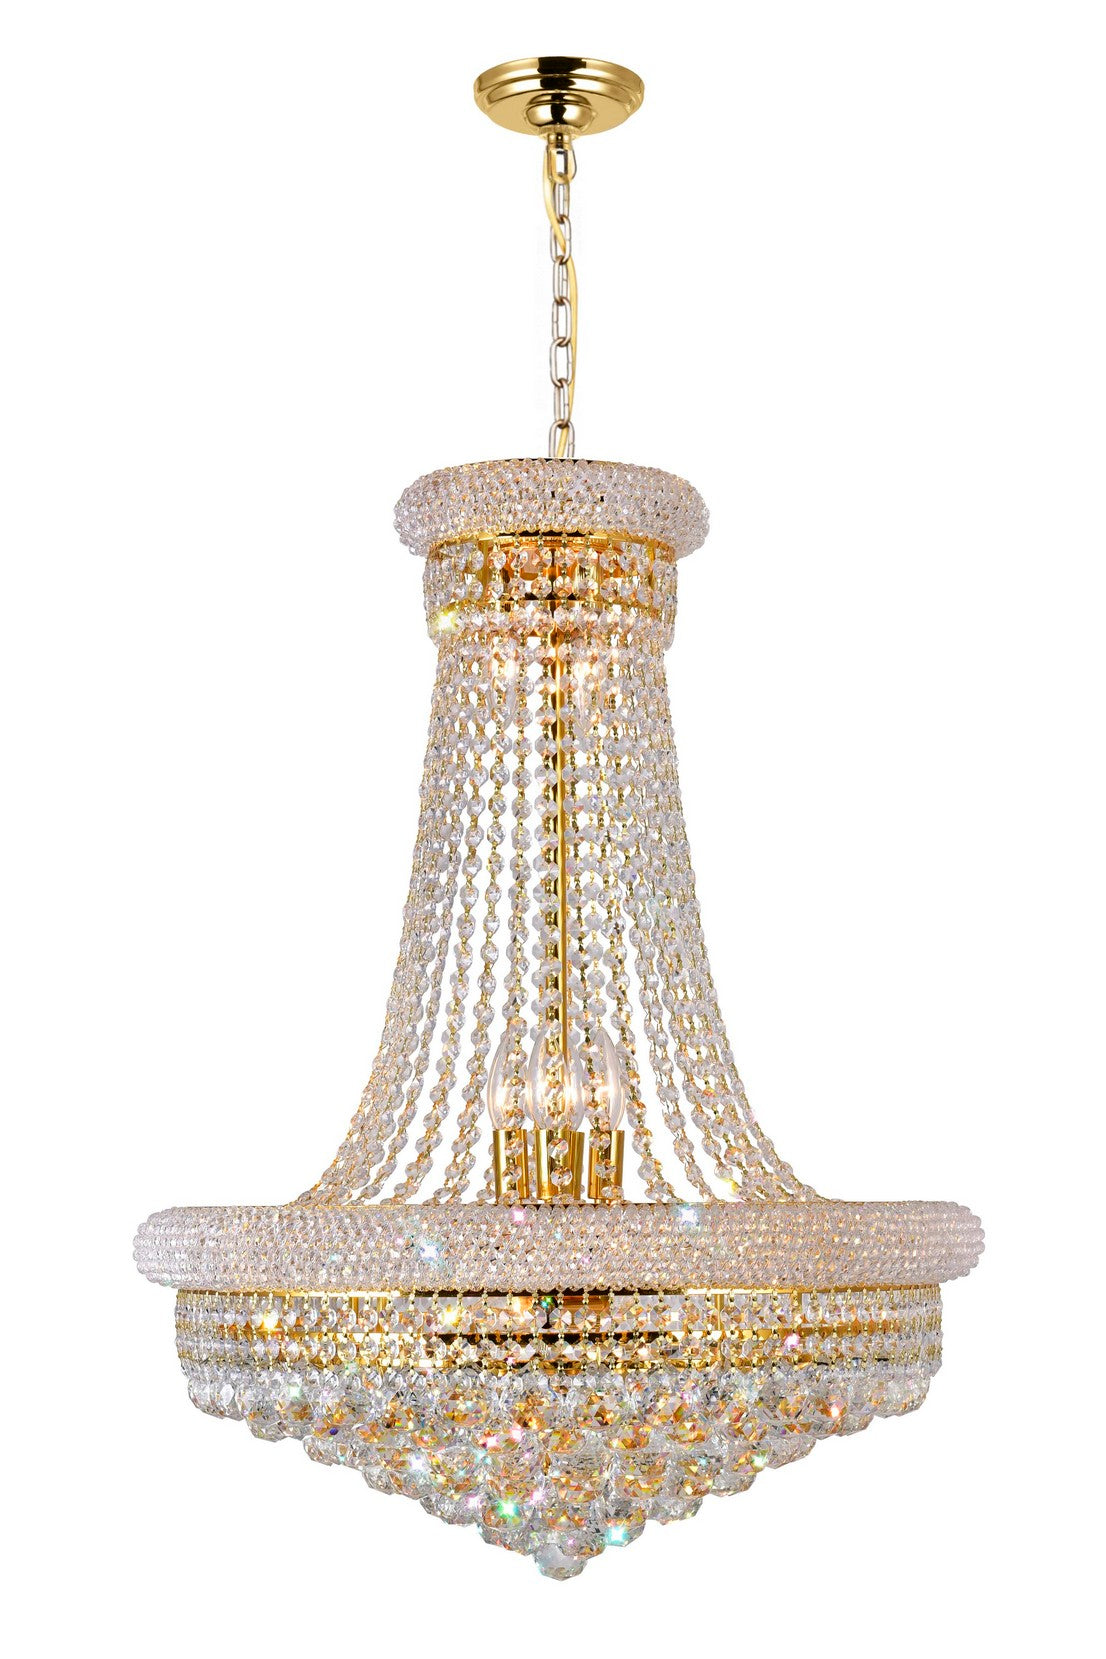 17 LIGHT DOWN CHANDELIER WITH GOLD FINISH - Dreamart Gallery